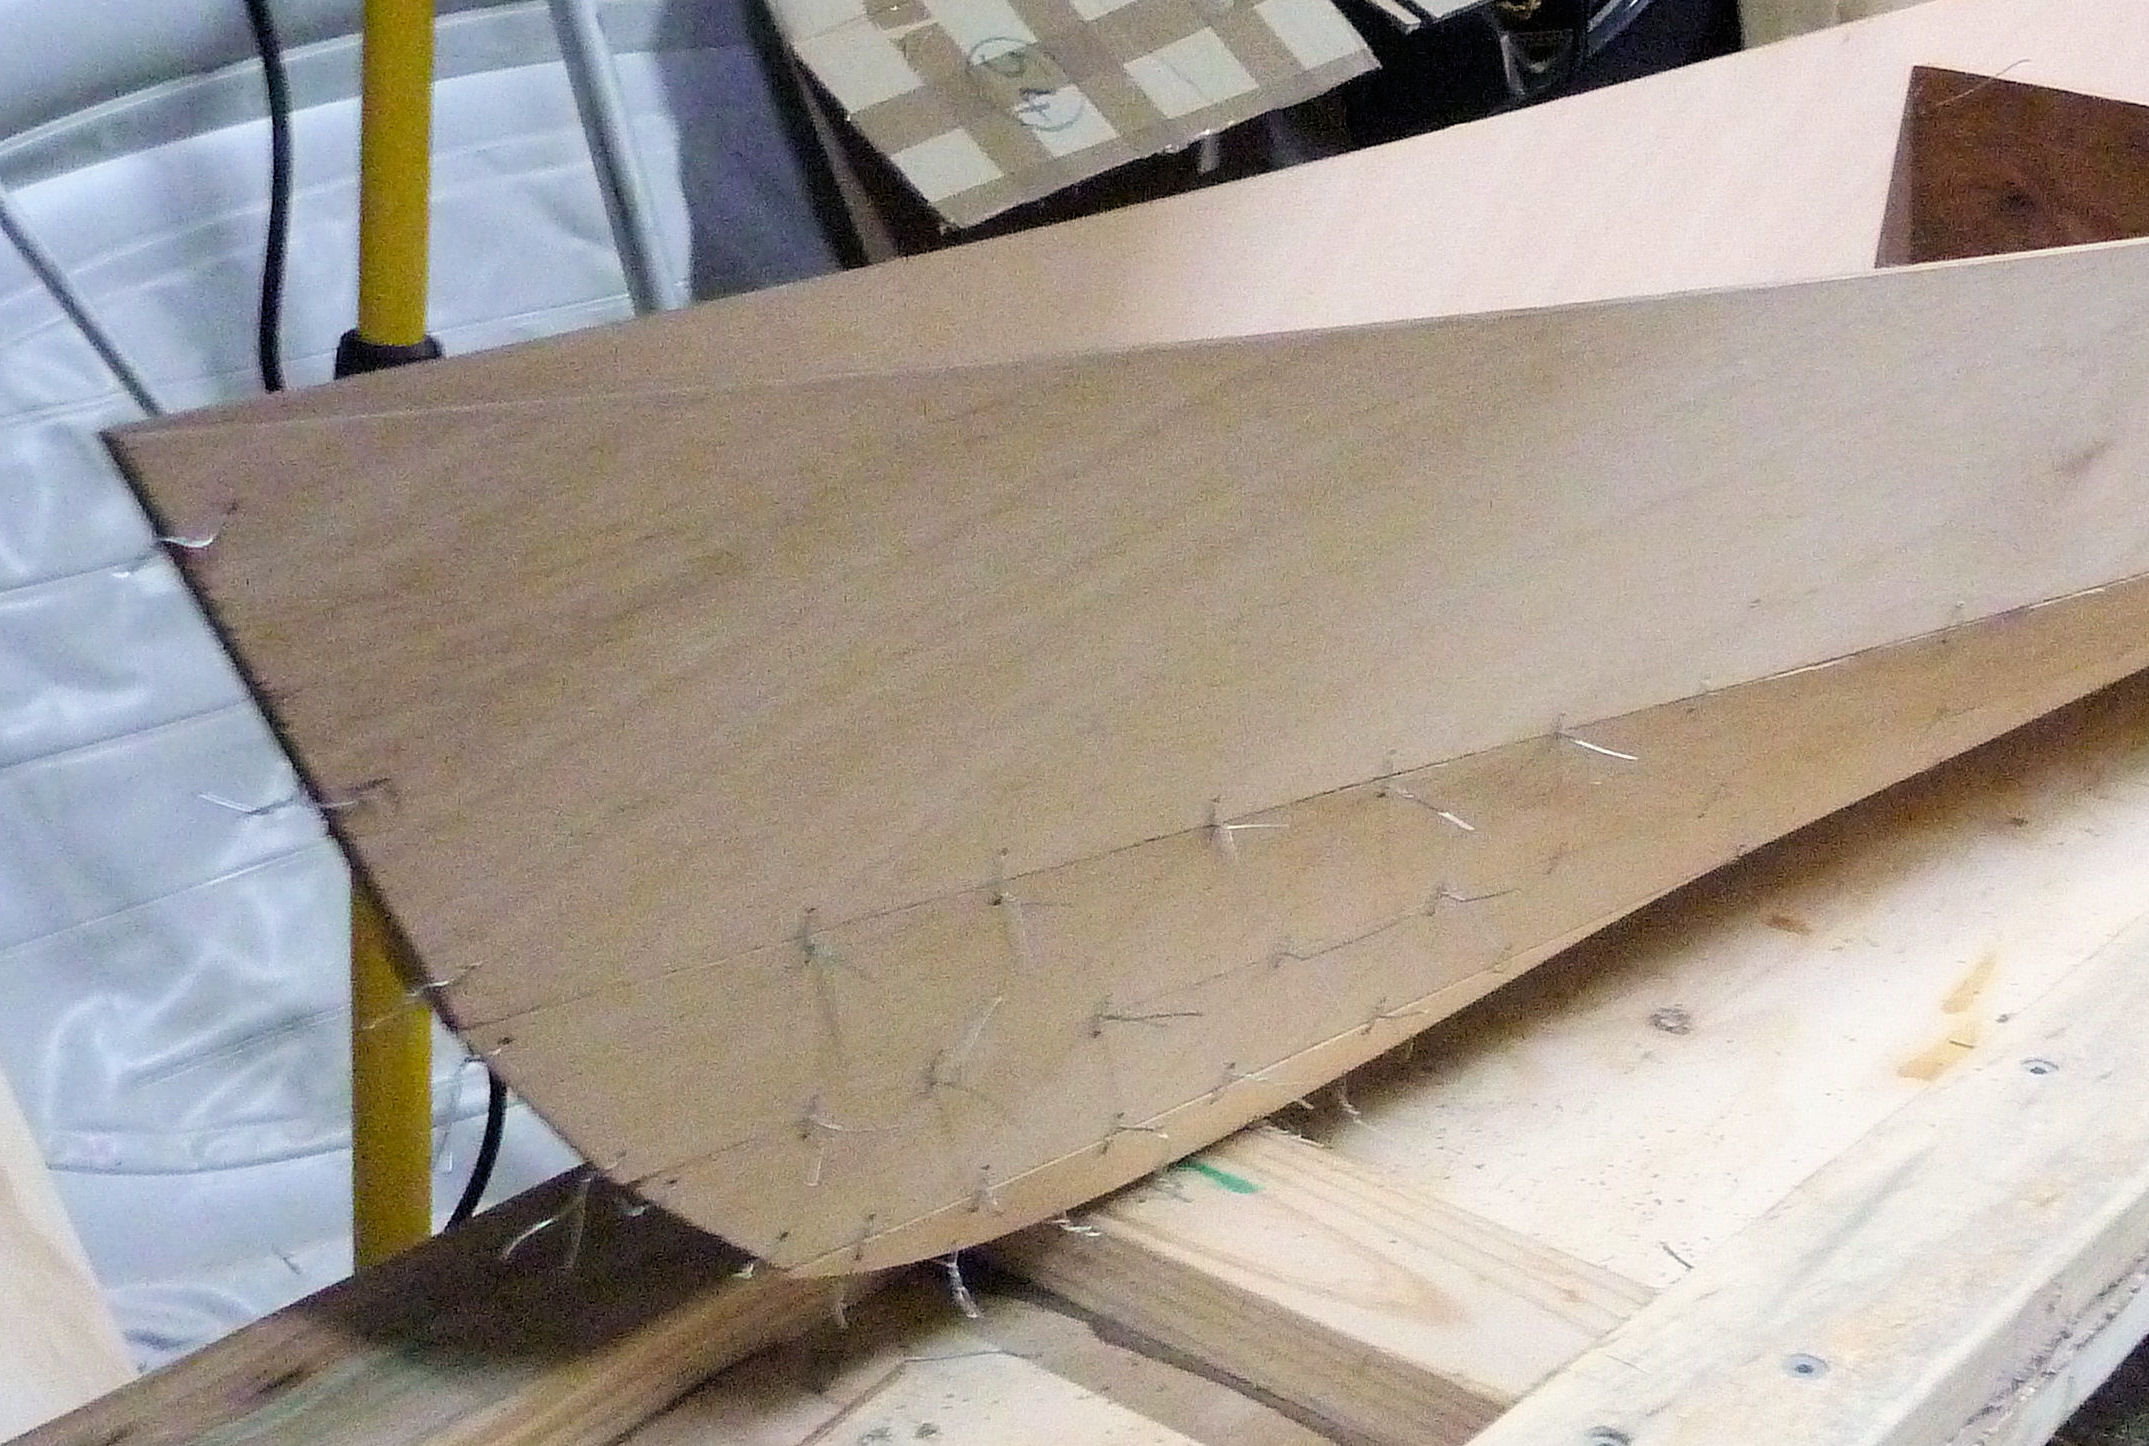 Diy Plywood Boat Building - Do It Your Self